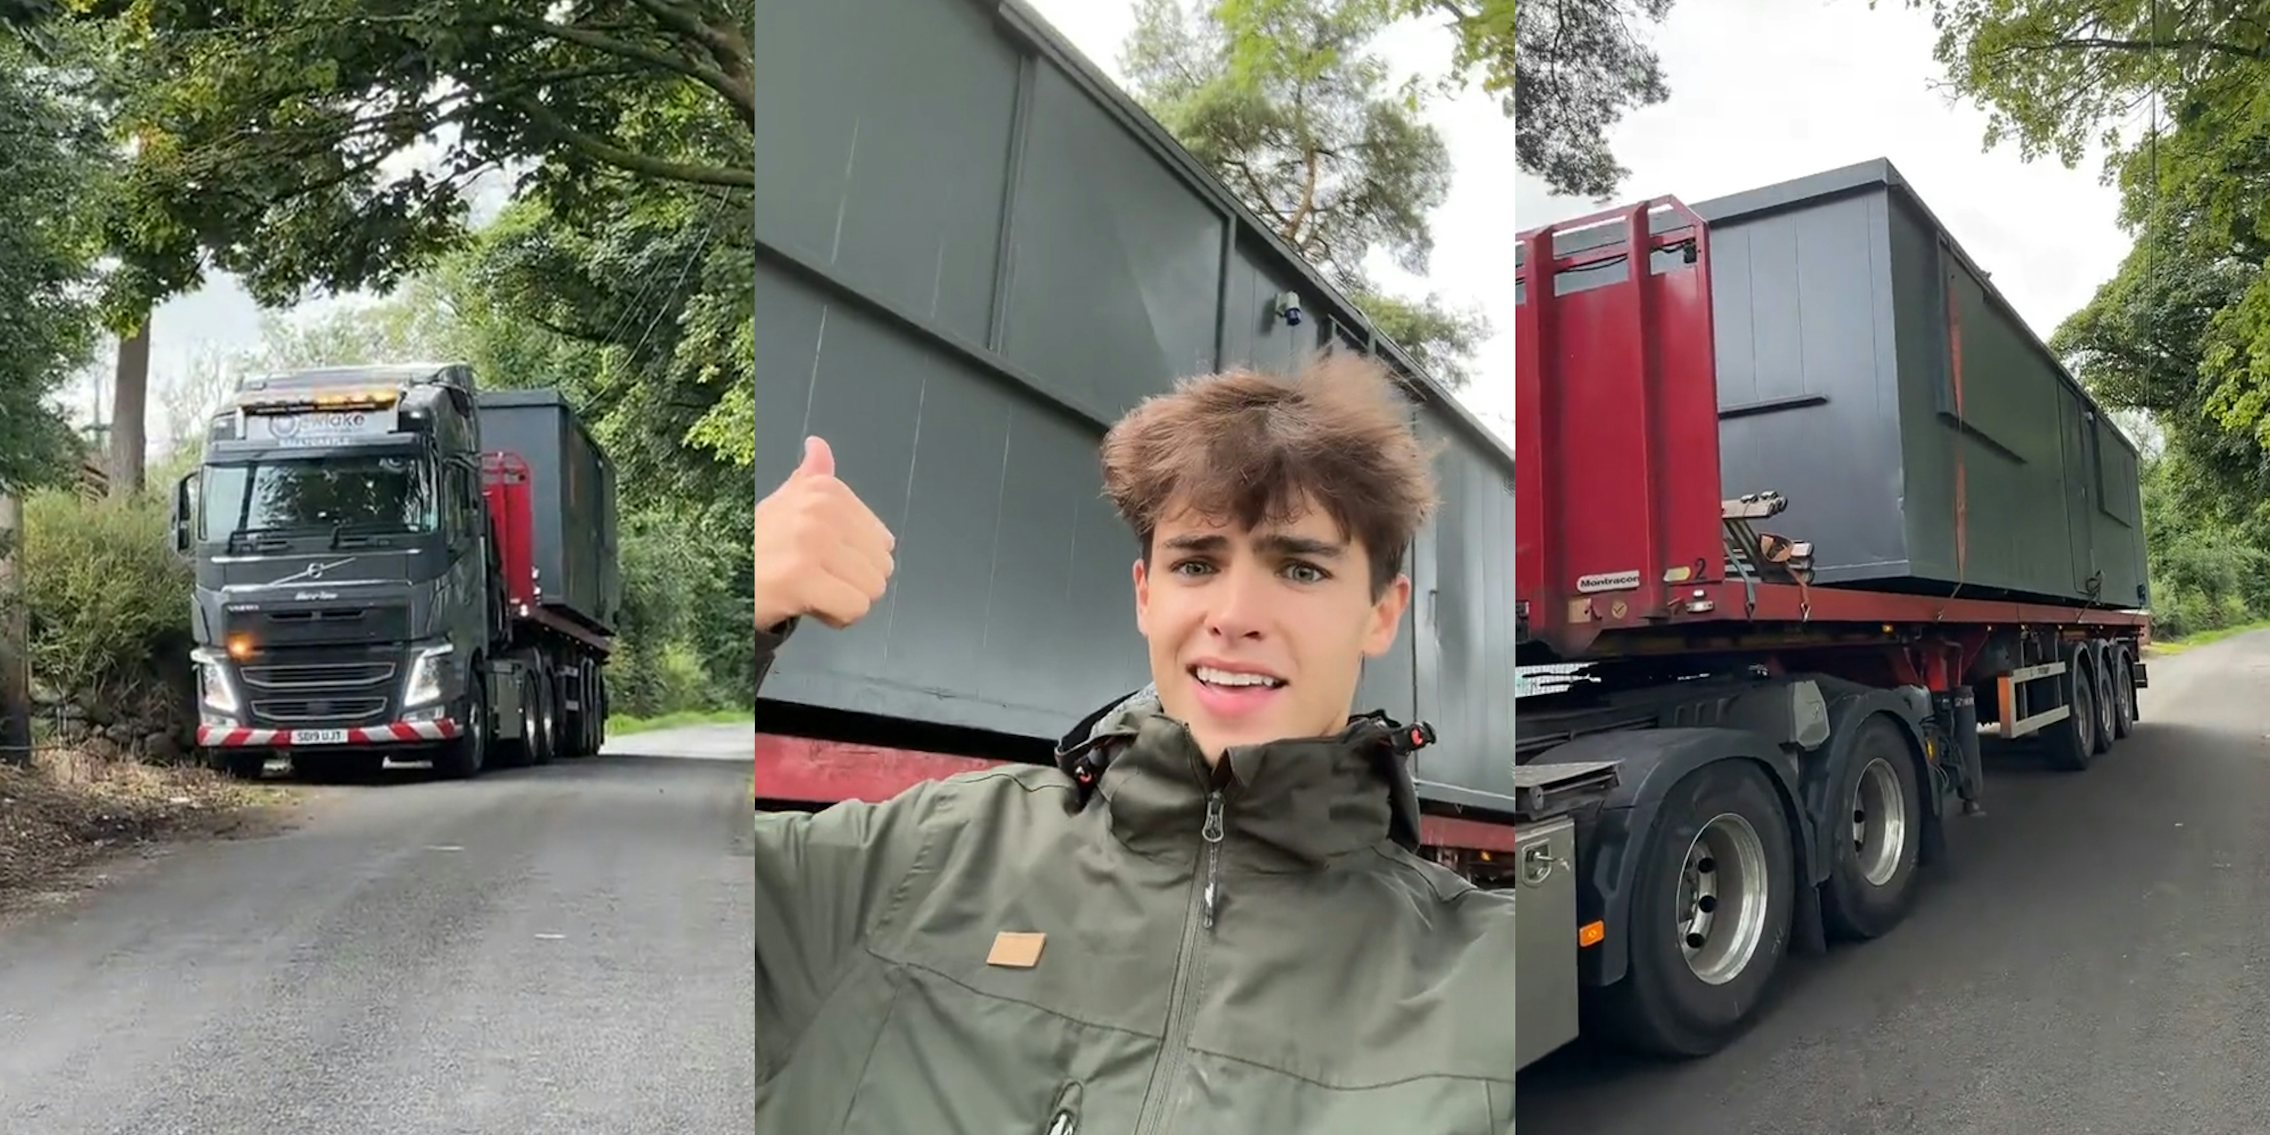 delivery truck (l) young man pointing to modular home (c) modular home on delivery truck (r)